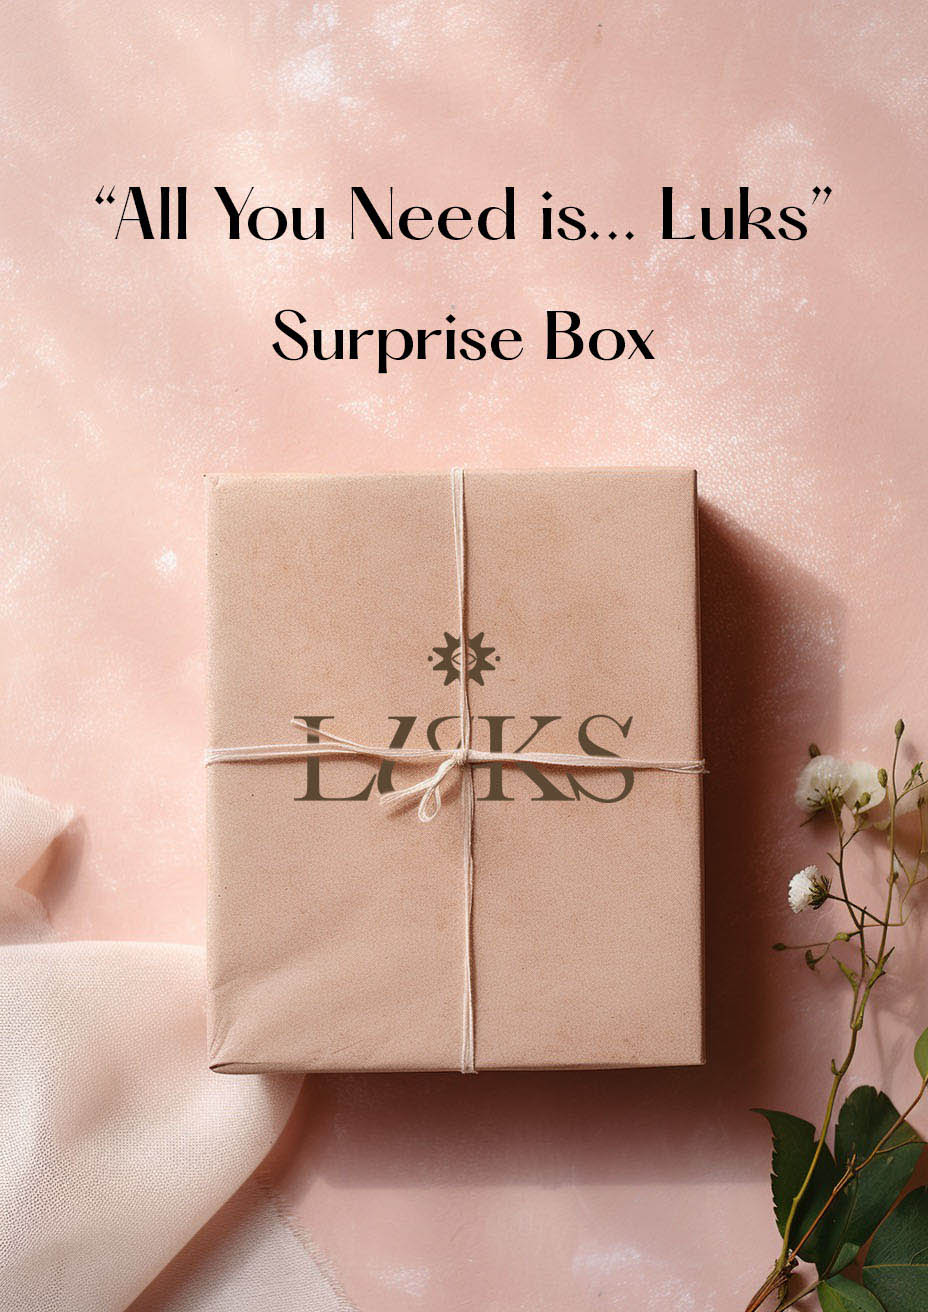 “All You Need is Luks” Surprise Box